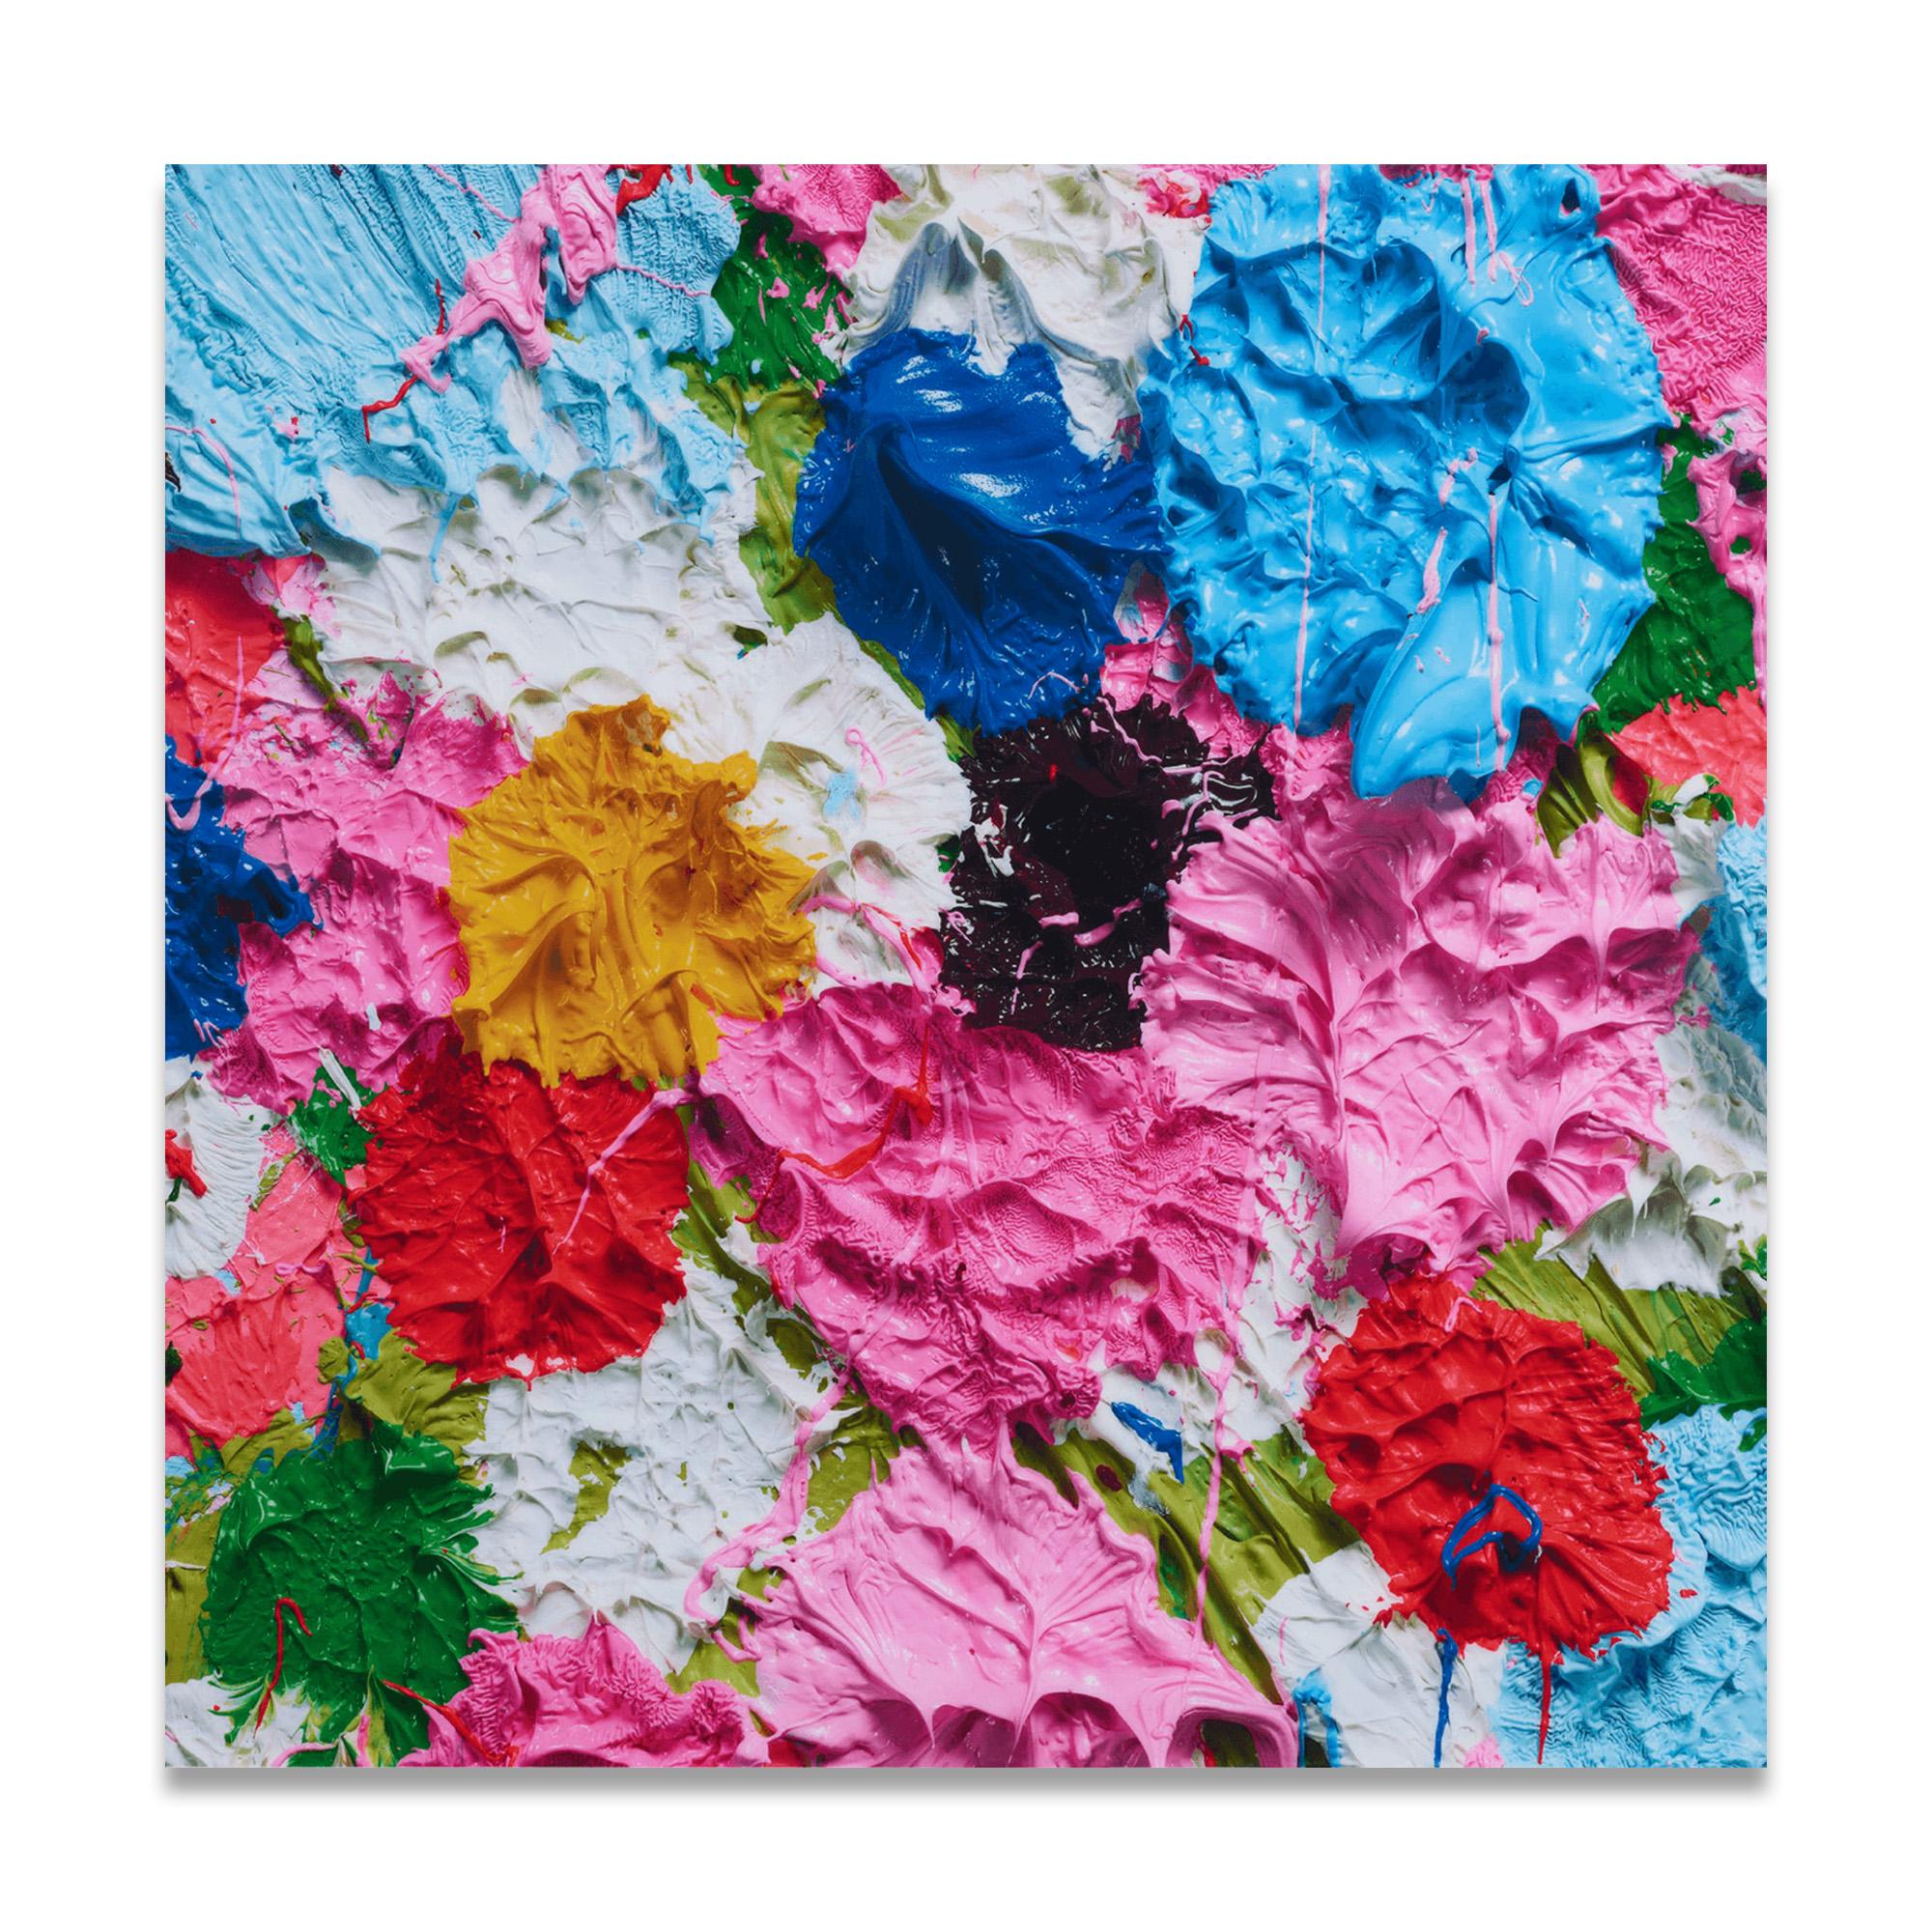 Are Damien Hirst prints a good investment?